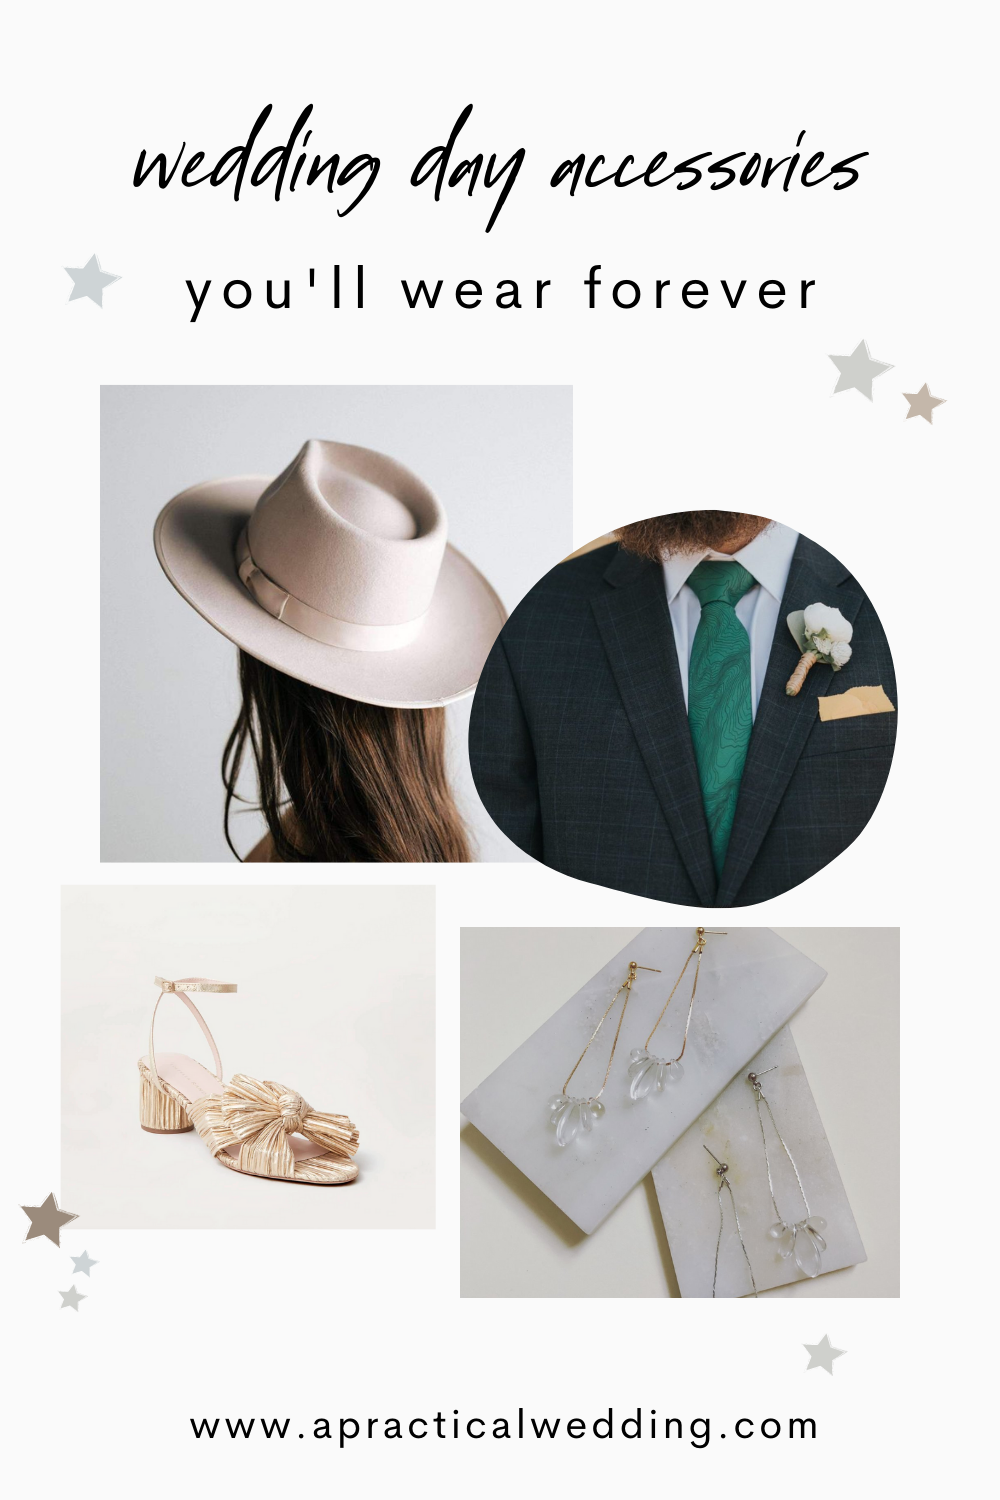 wedding accessories you'll wear forever pin graphic